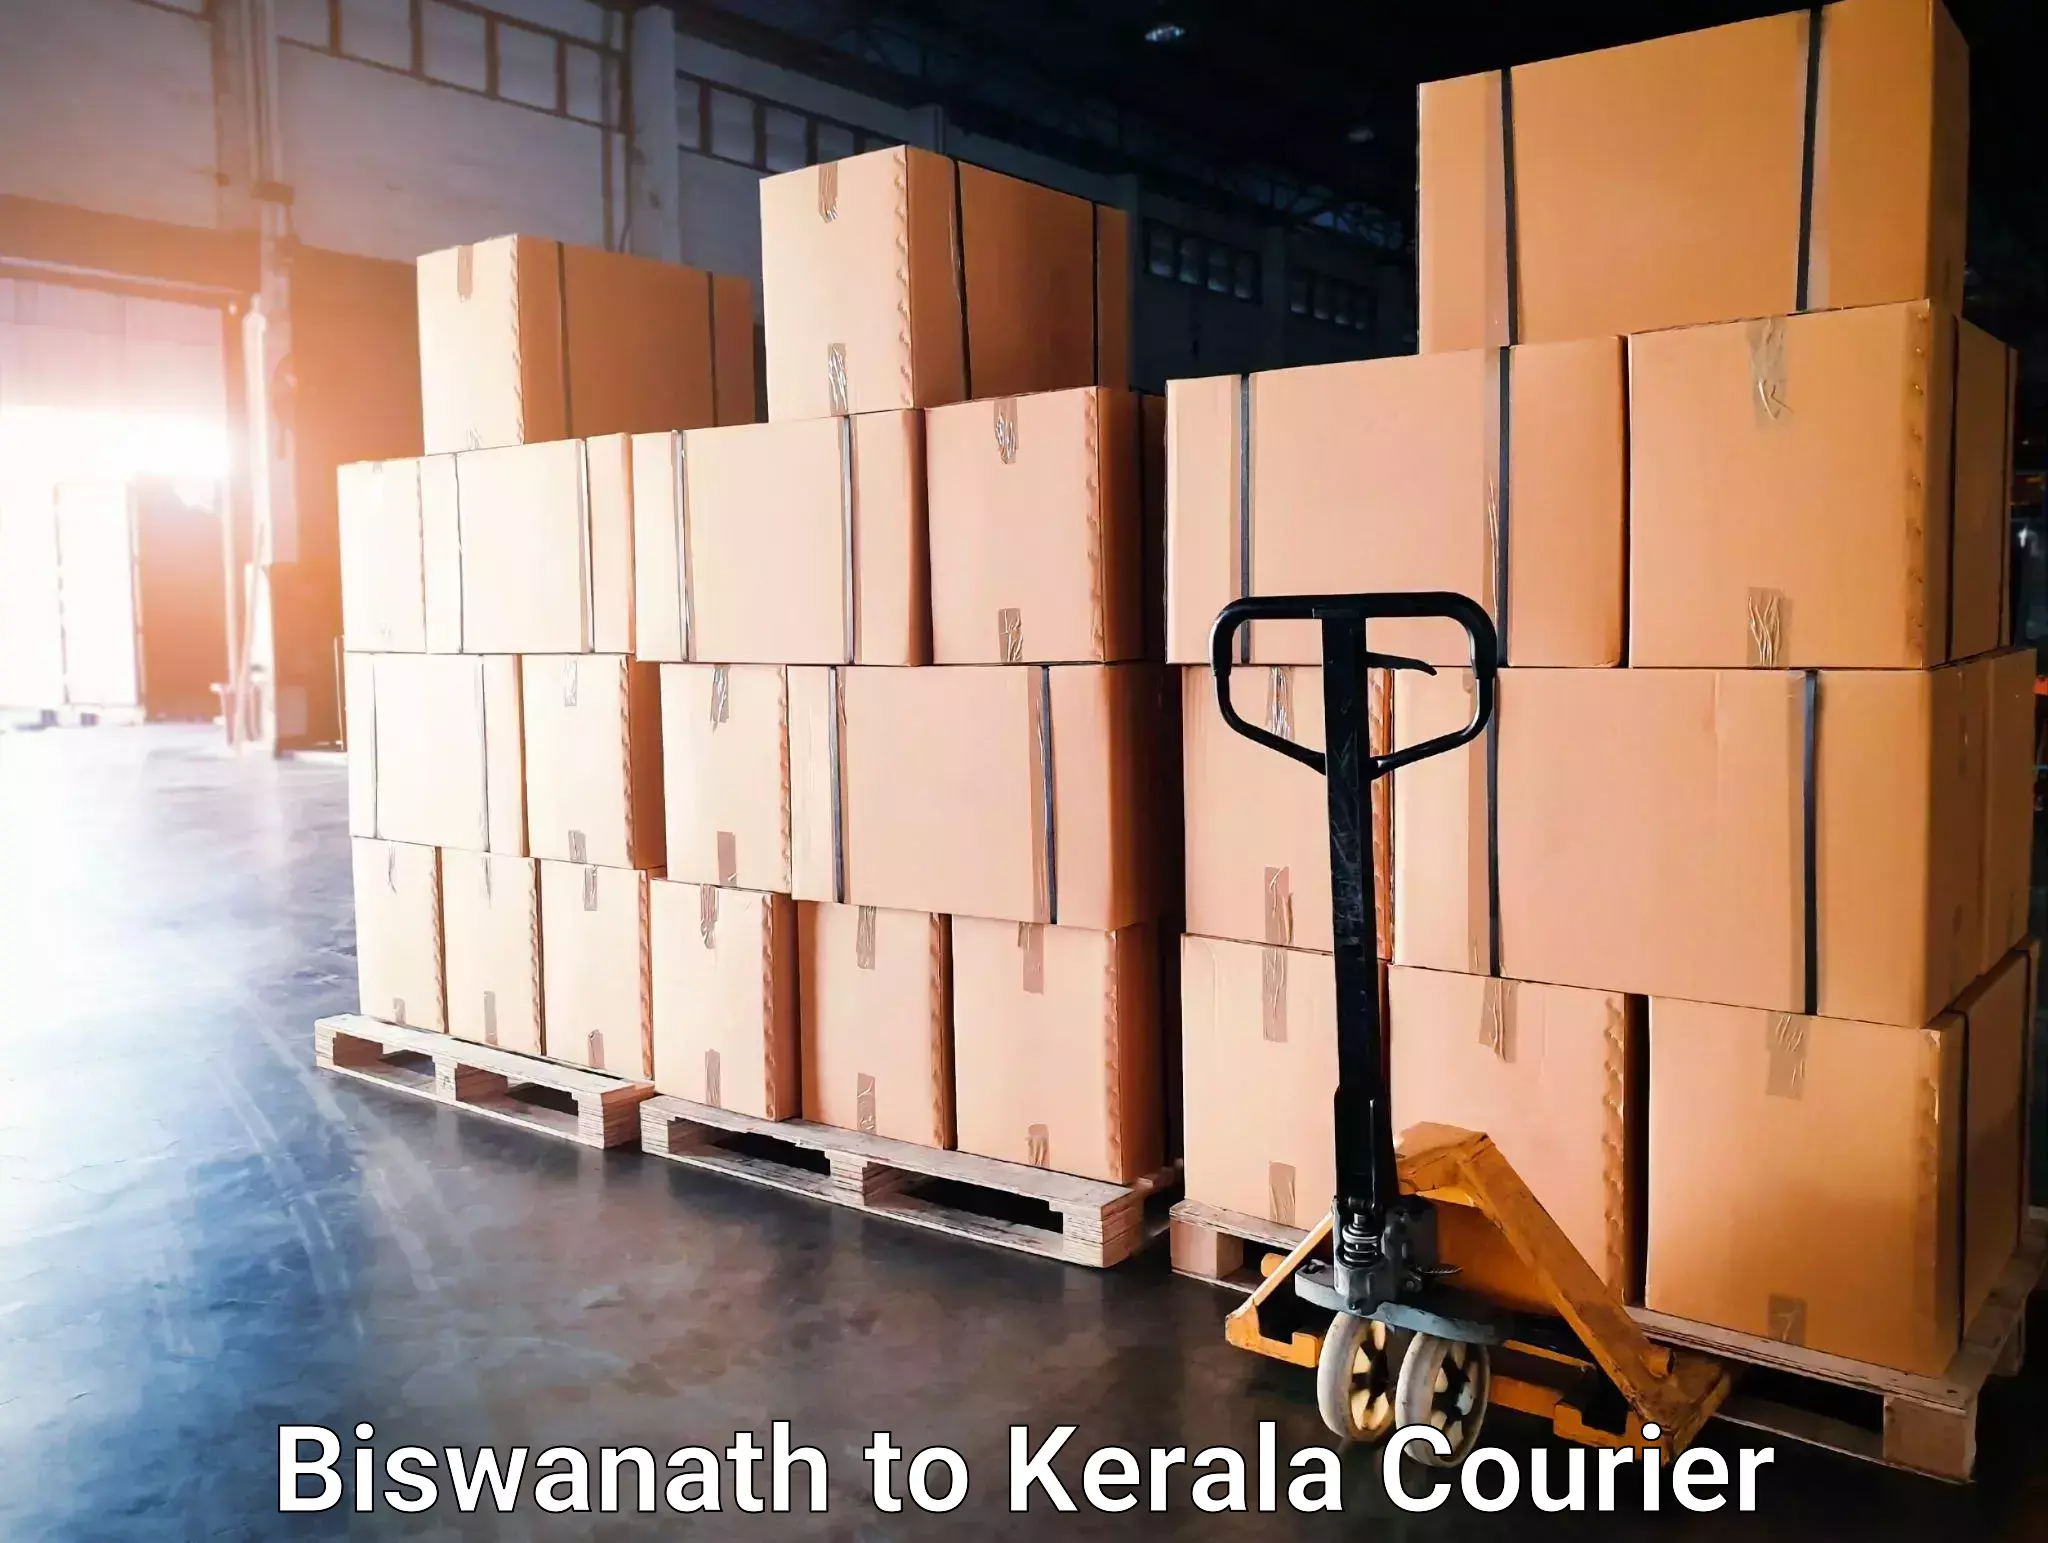 Urgent courier needs Biswanath to Cochin University of Science and Technology